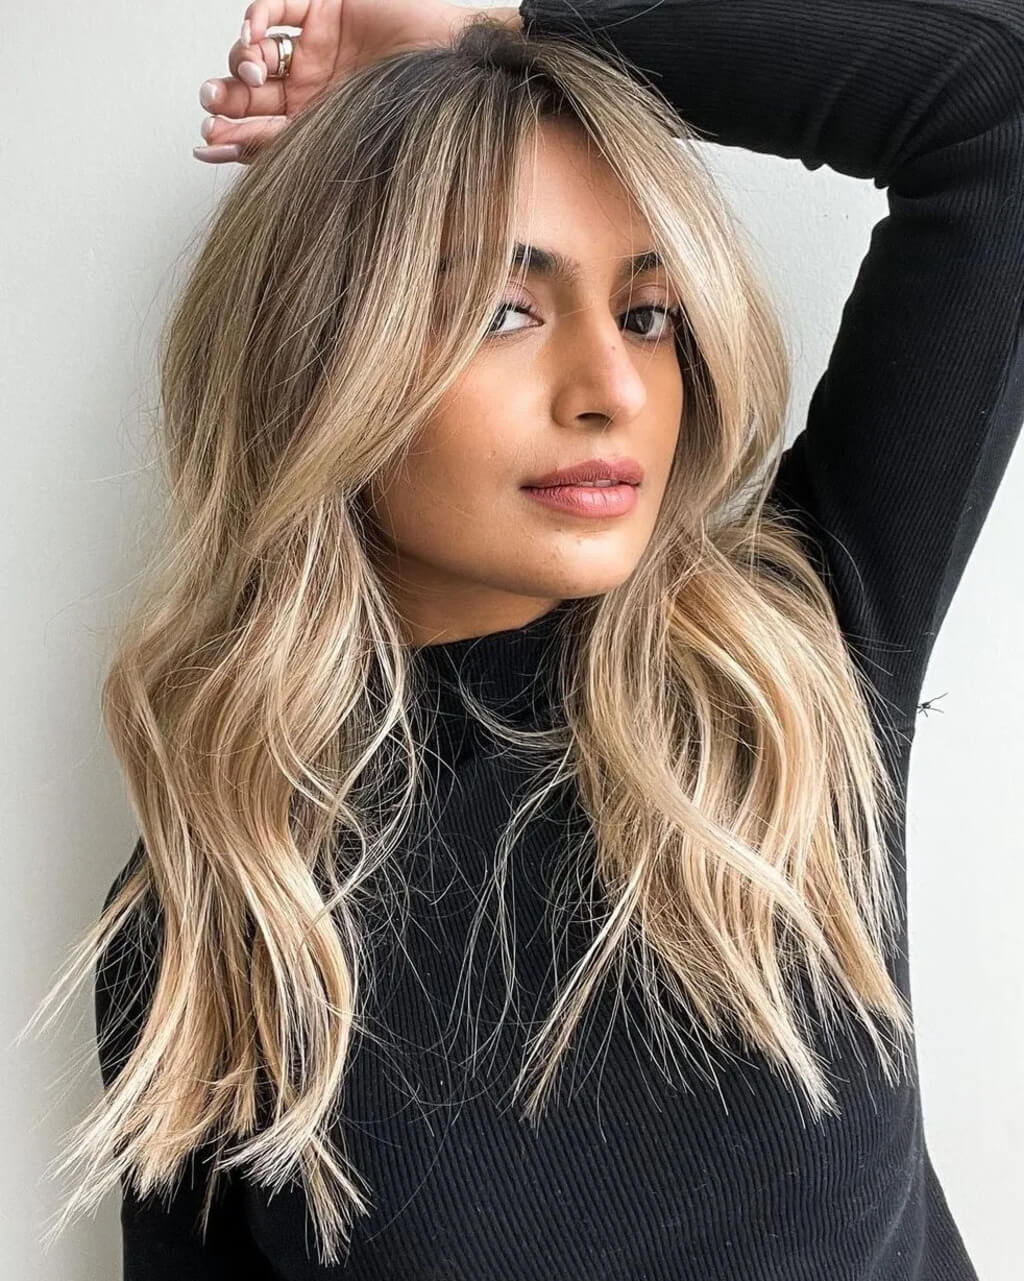 How to style long gray hair with curtain bangs?